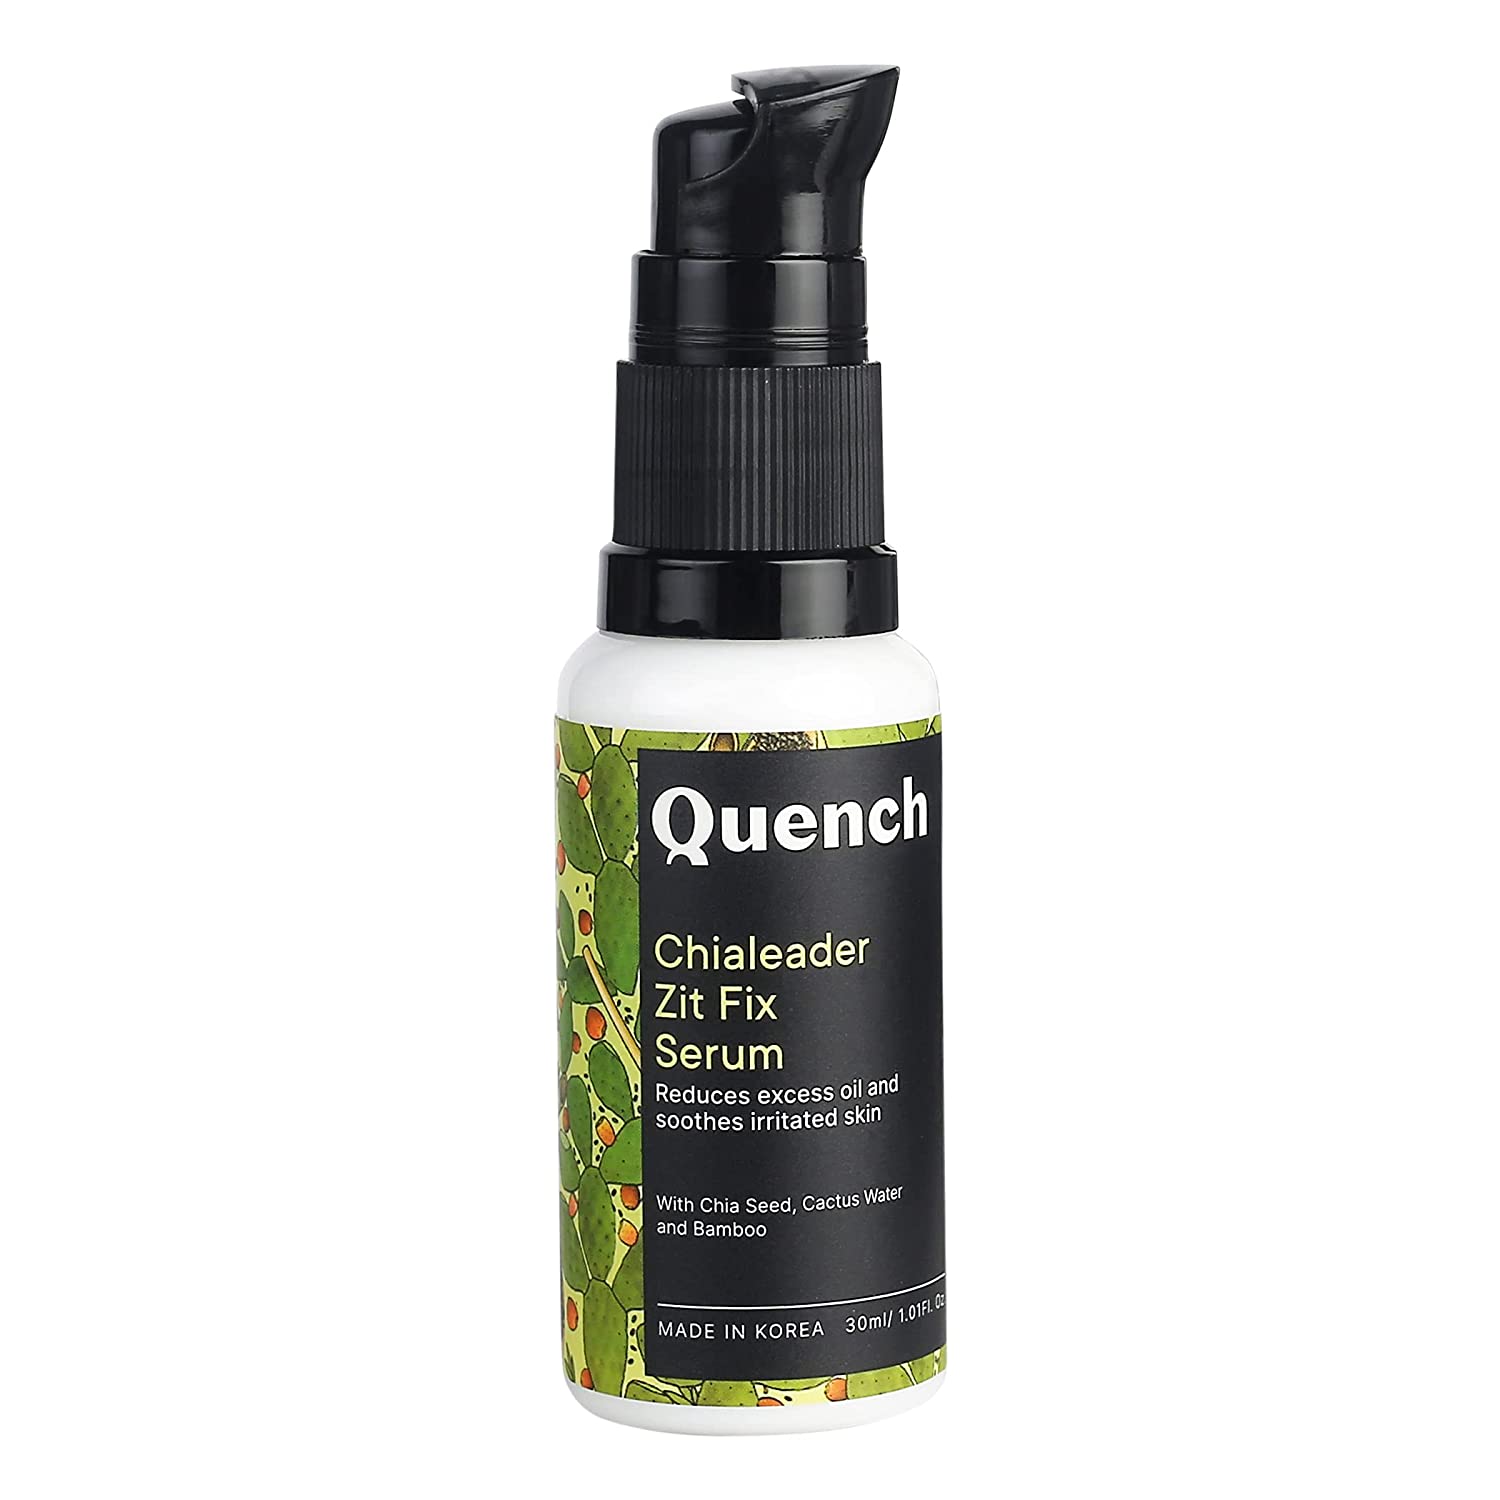 Quench Botanics Chialeader Zit Fix Serum | Controls Acne and Excess Oil | with Chia Seed, Bamboo, Cactus Water, Tea Tree and Salicylic Acid (30ml)